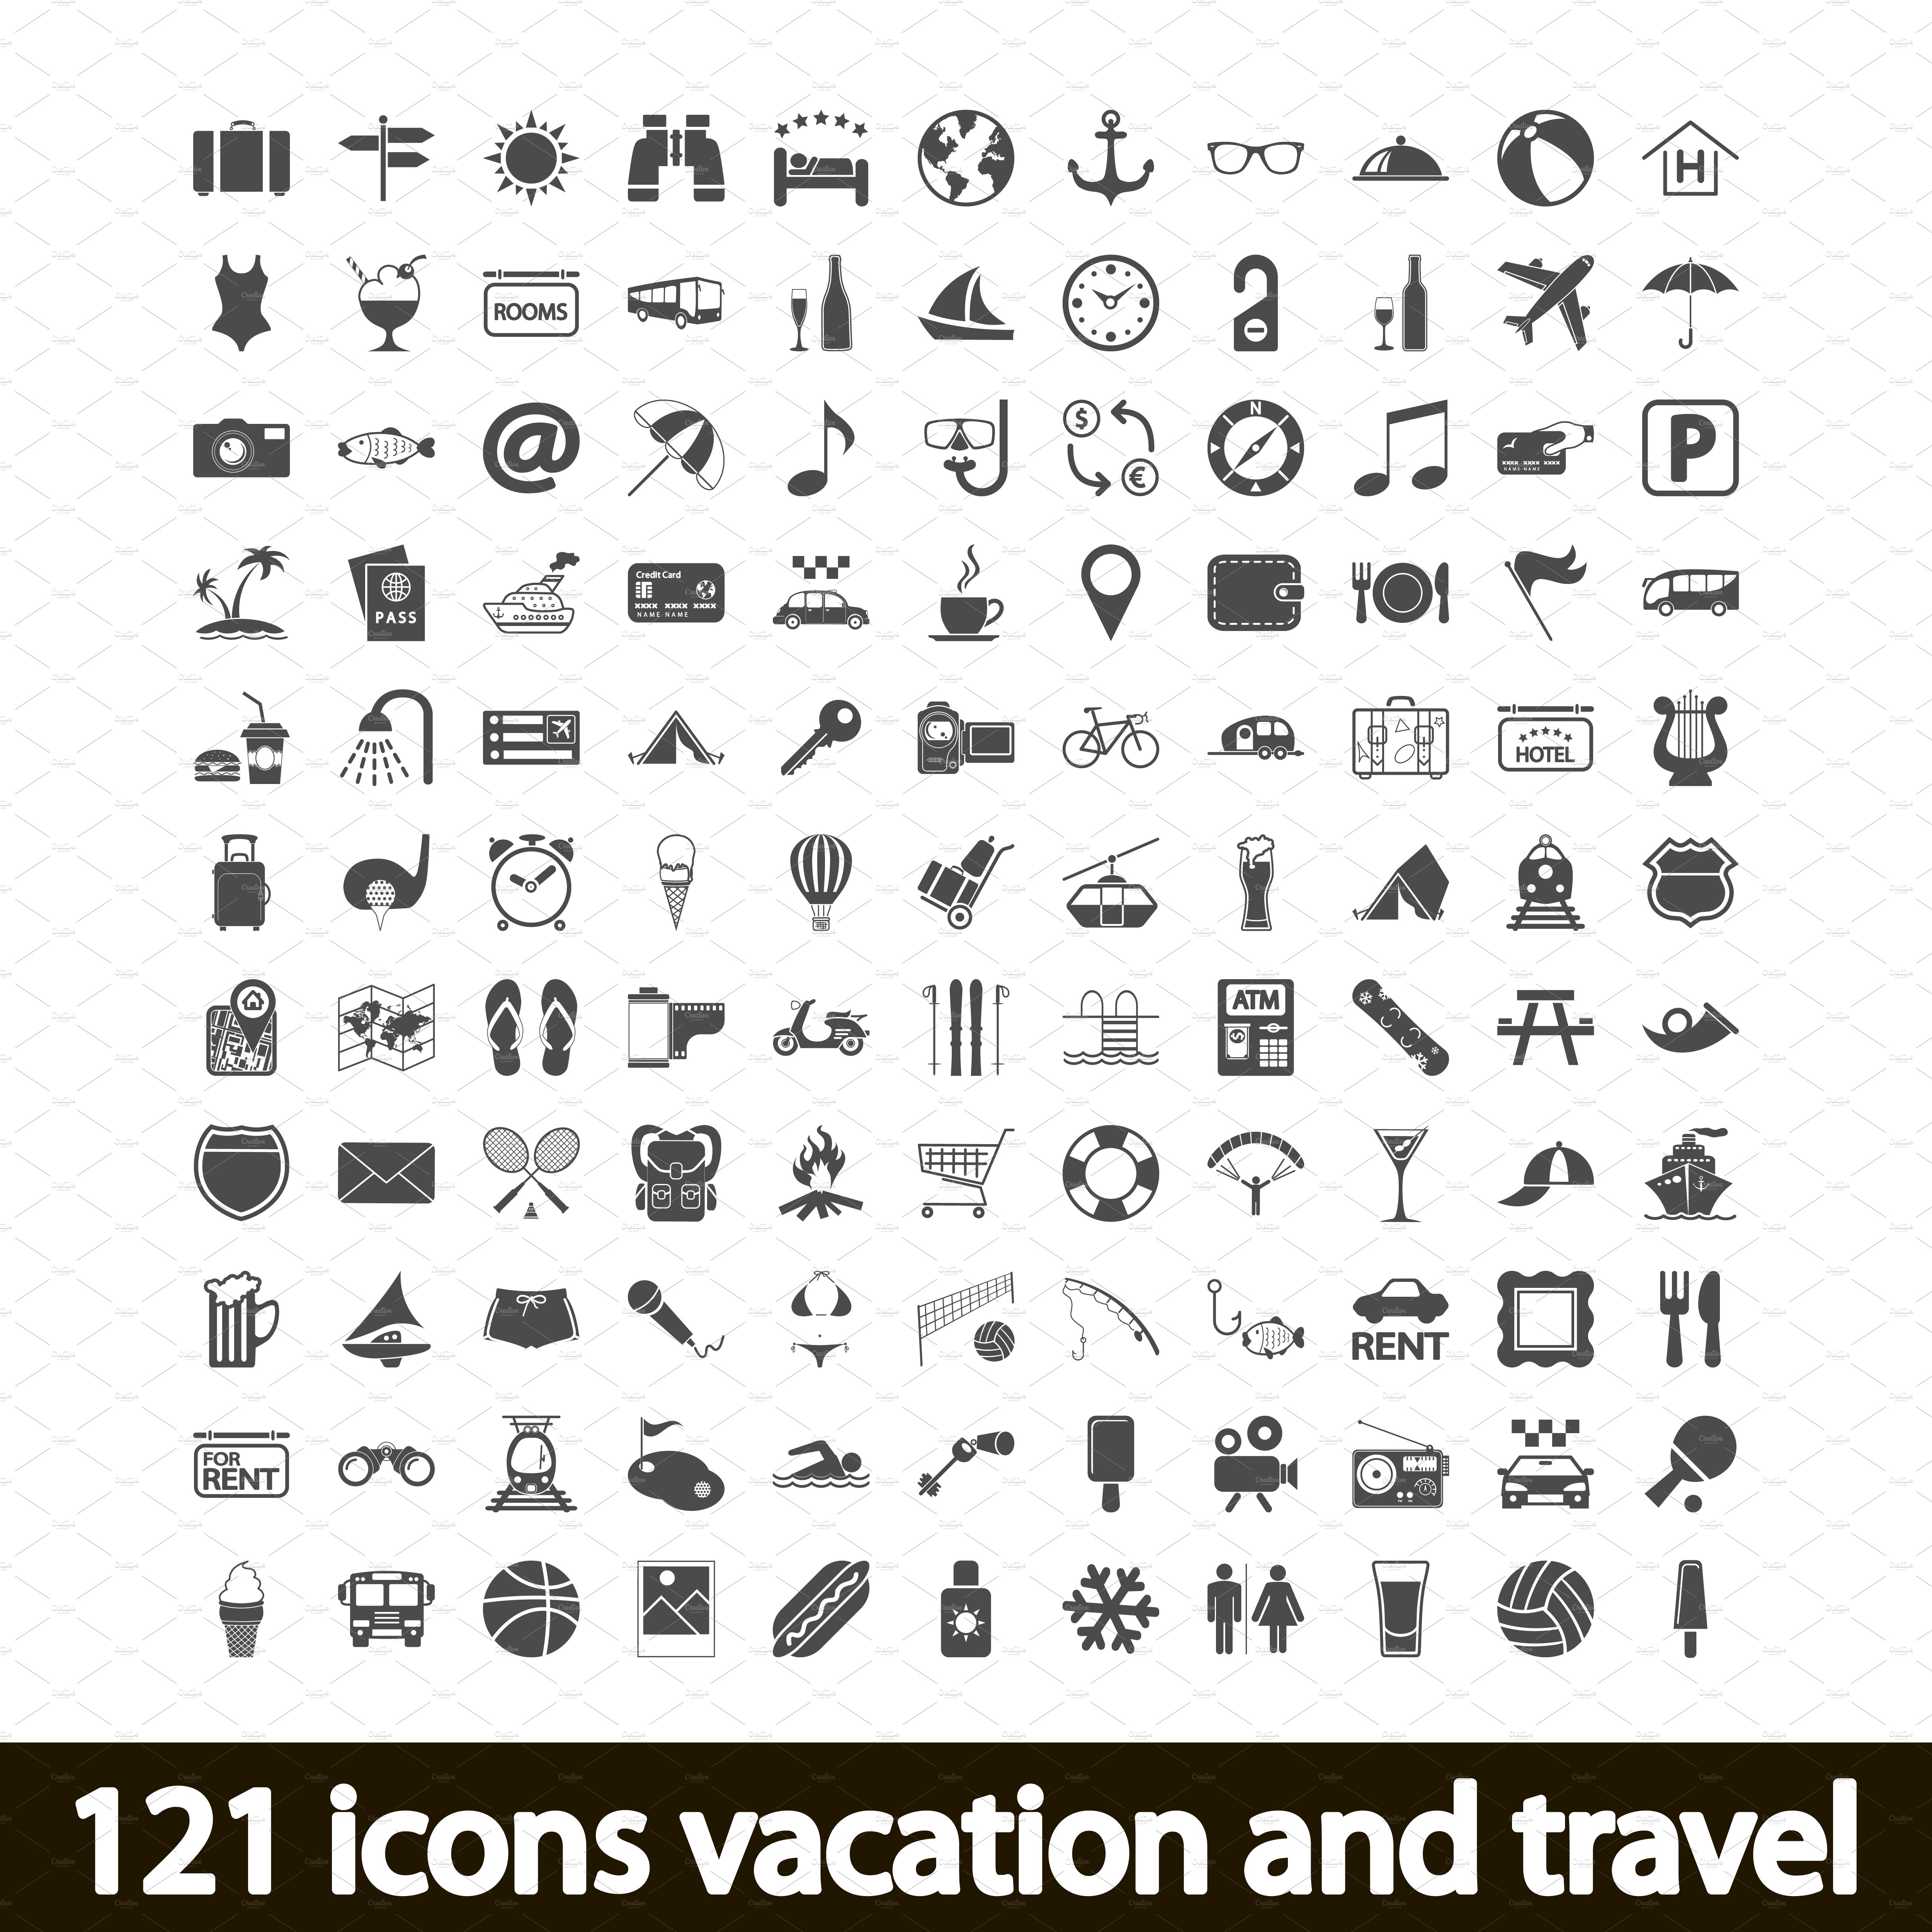 121 icons set vacation and travel. cover image.